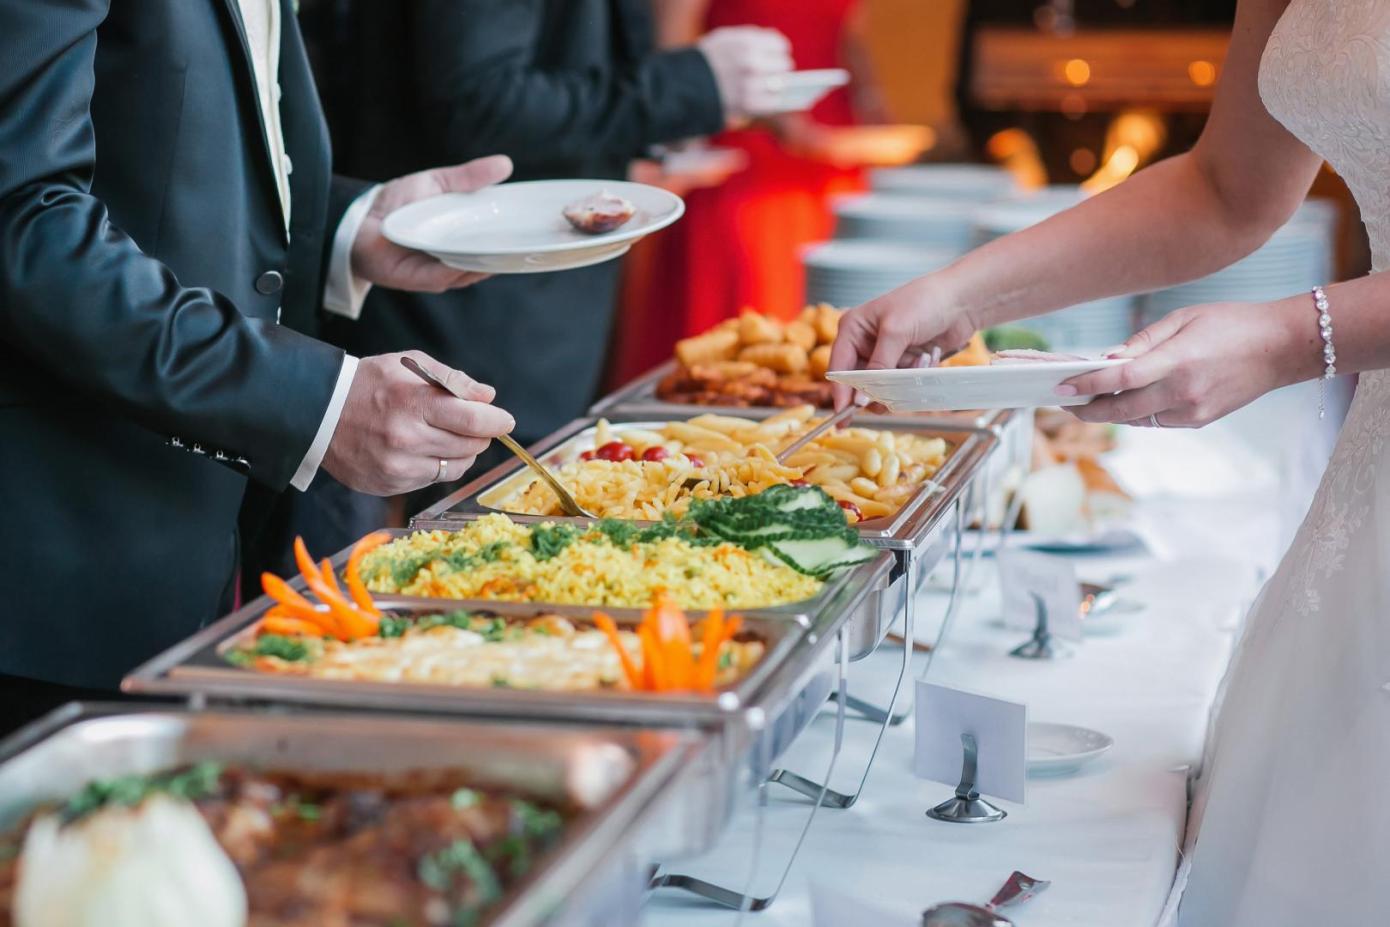 How Can I Handle Dietary Restrictions and Allergies at My Catering Event?